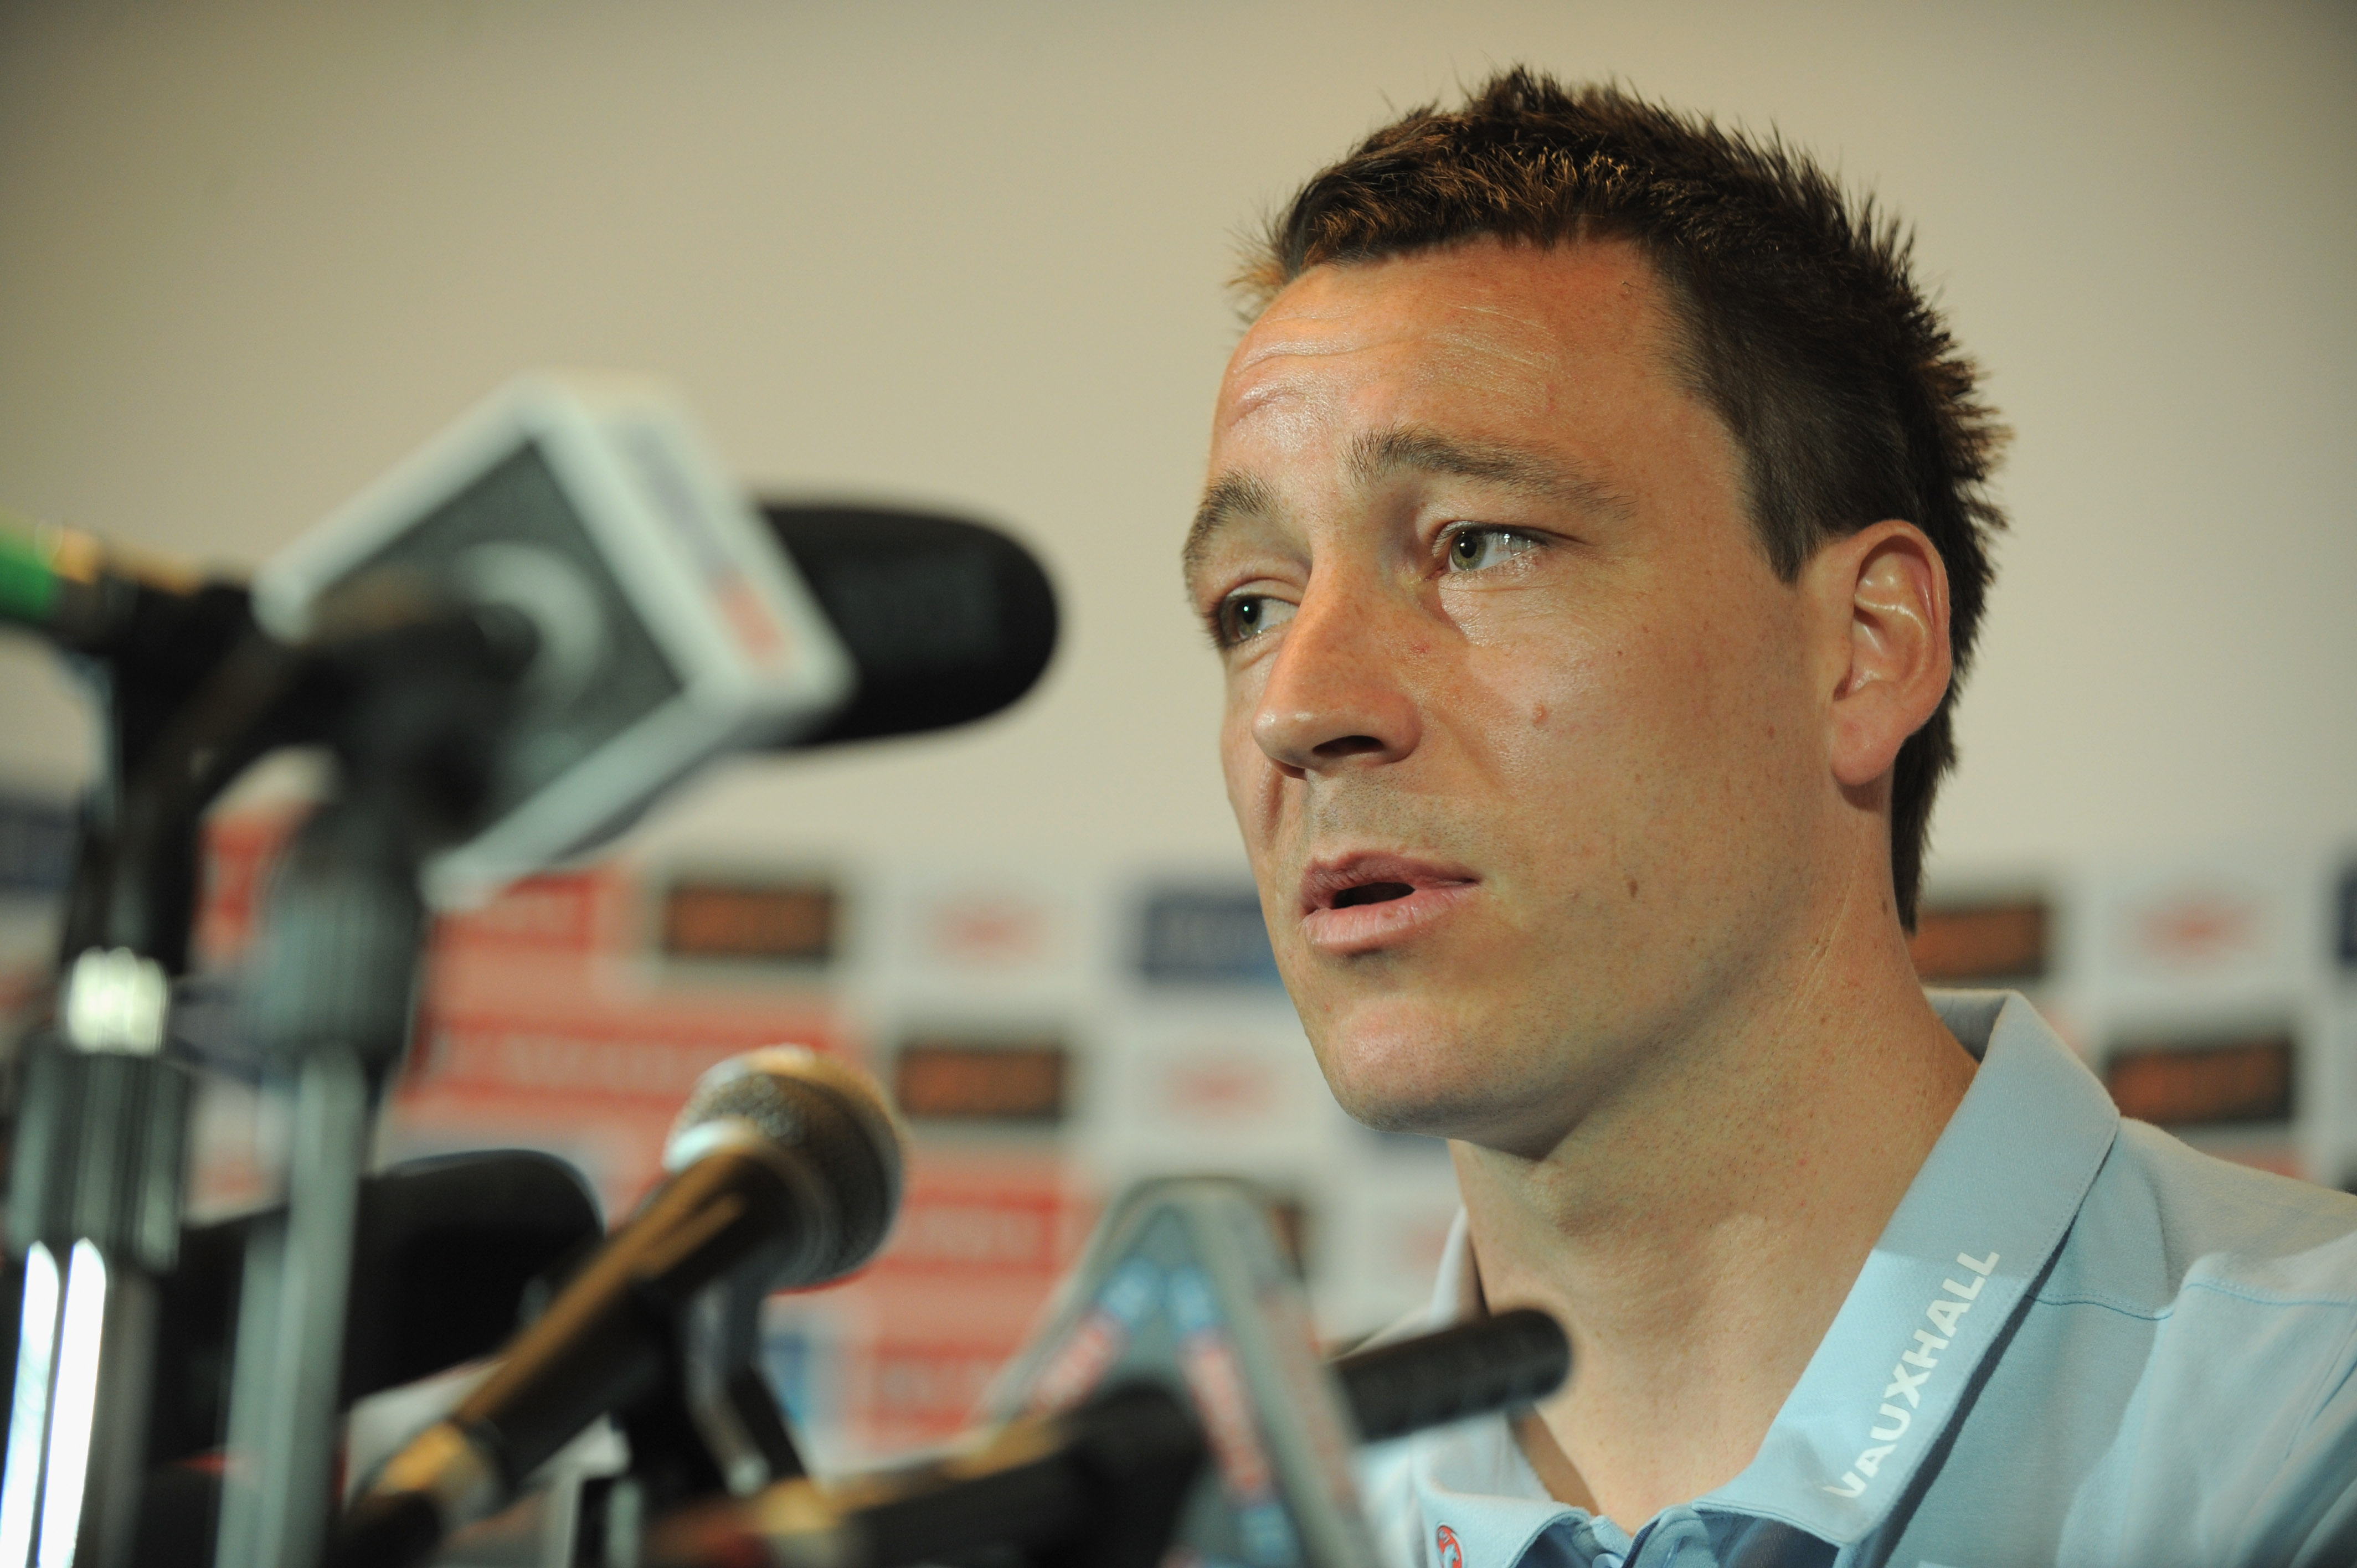 ST ALBANS, ENGLAND - MARCH 22: John Terry speaks to the media during the England press conference ahead of their UEFA EURO 2012 qualifier against Wales, at London Colney on March 22, 2011 in St Albans, England. (Photo by Michael Regan/Getty Images)